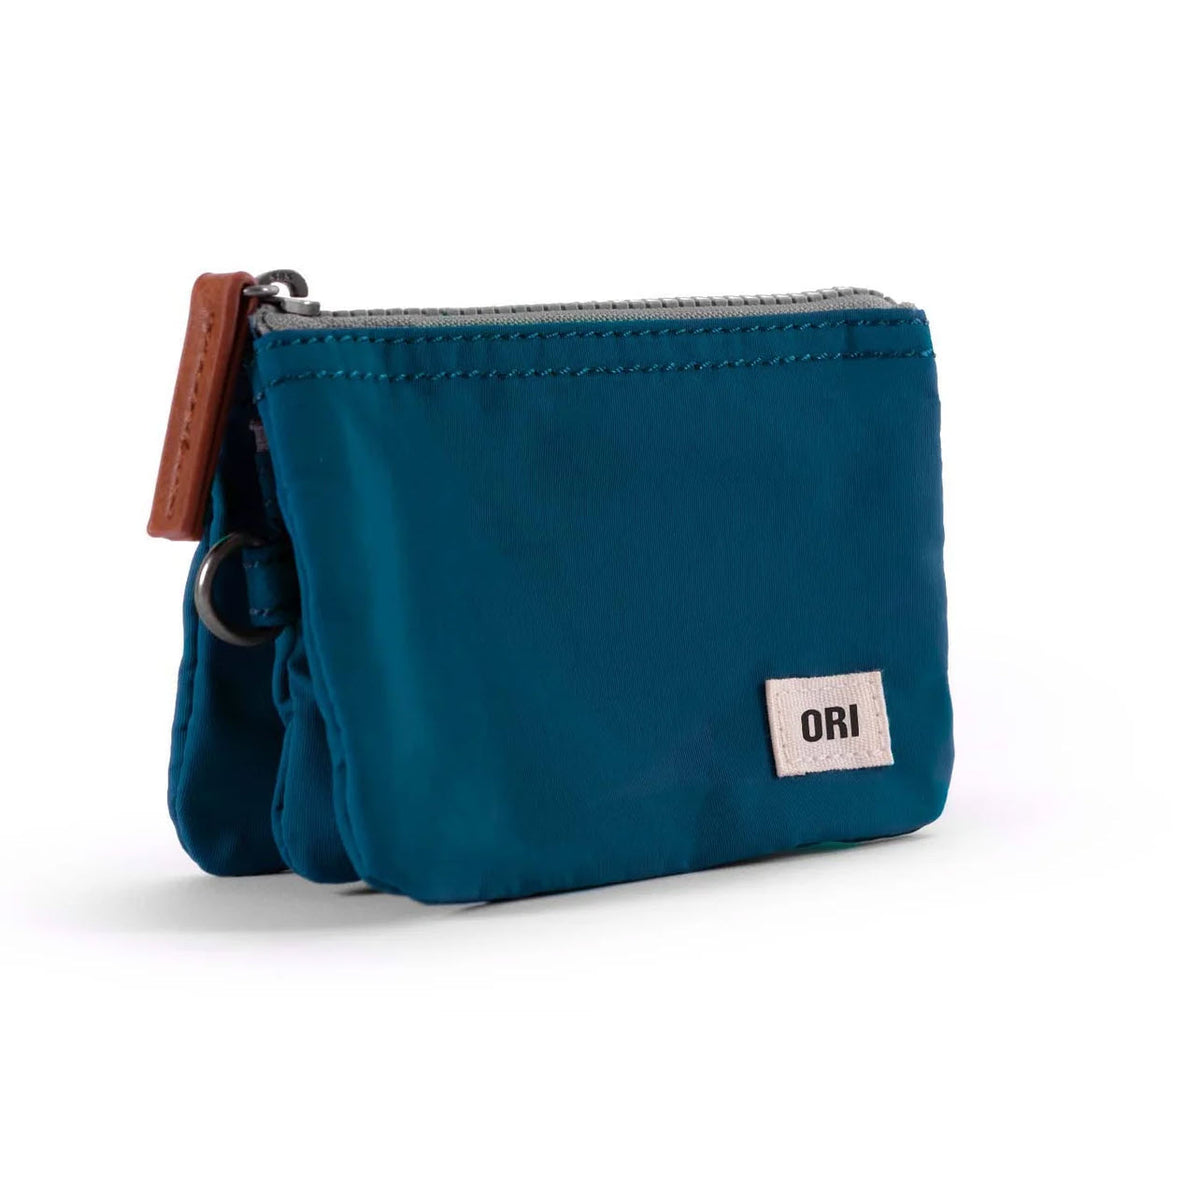 A ORI LONDON CARNABY SMALL POUCH TEAL with a zipper and a brown leather pull tab, featuring a small white label with the text &quot;ori&quot; on the front.